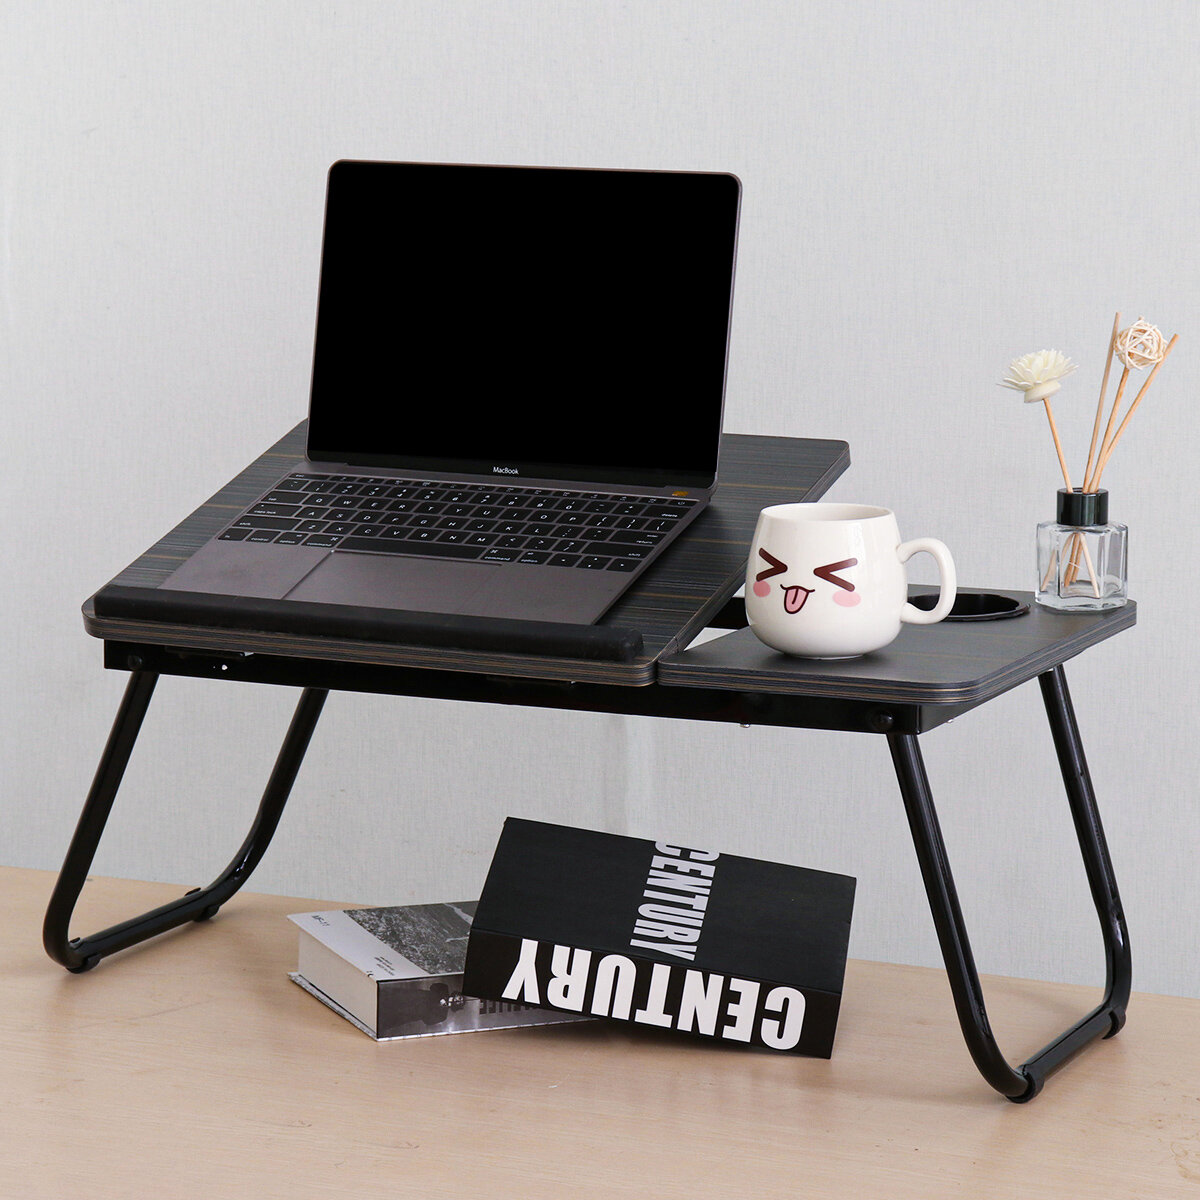 55*32cm Enlarge Foldable Adjustable with Cup Hole Density Board Computer Laptop Desk Table TV Bed Co